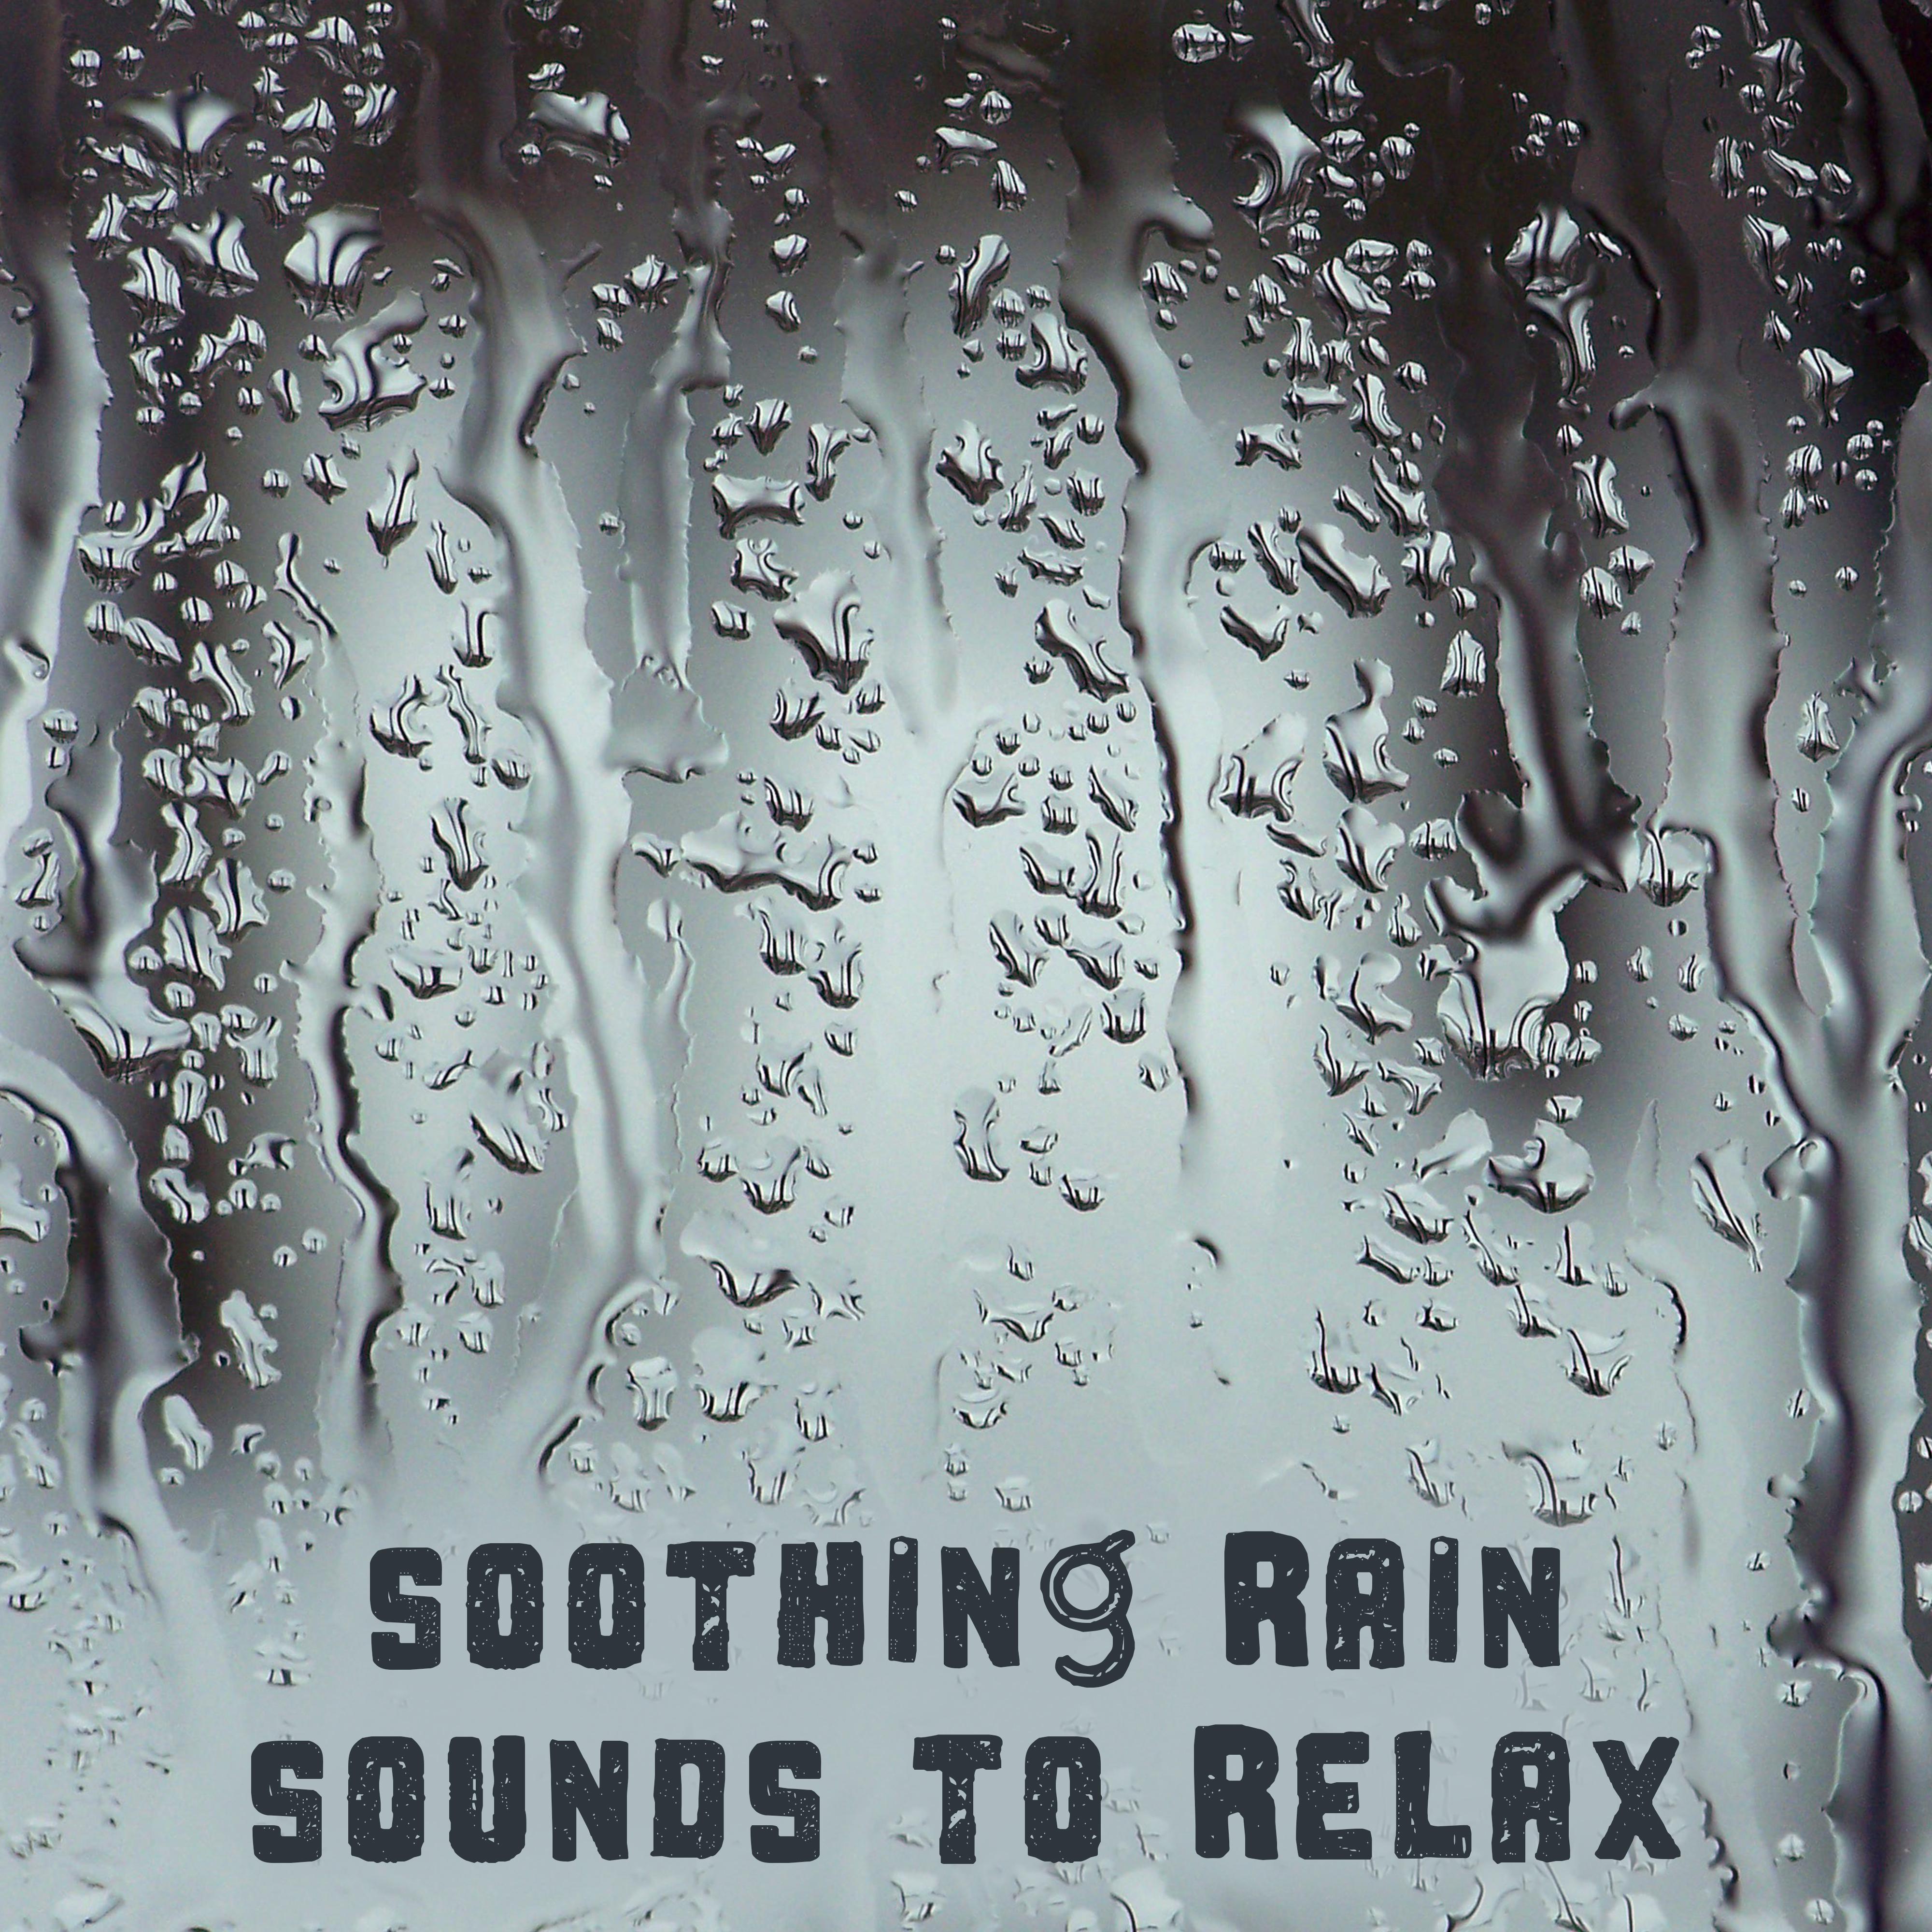 Soothing Rain Sounds to Relax  Calming New Age Music, Soft  Relaxing Sounds, Rest with Beautiful Music